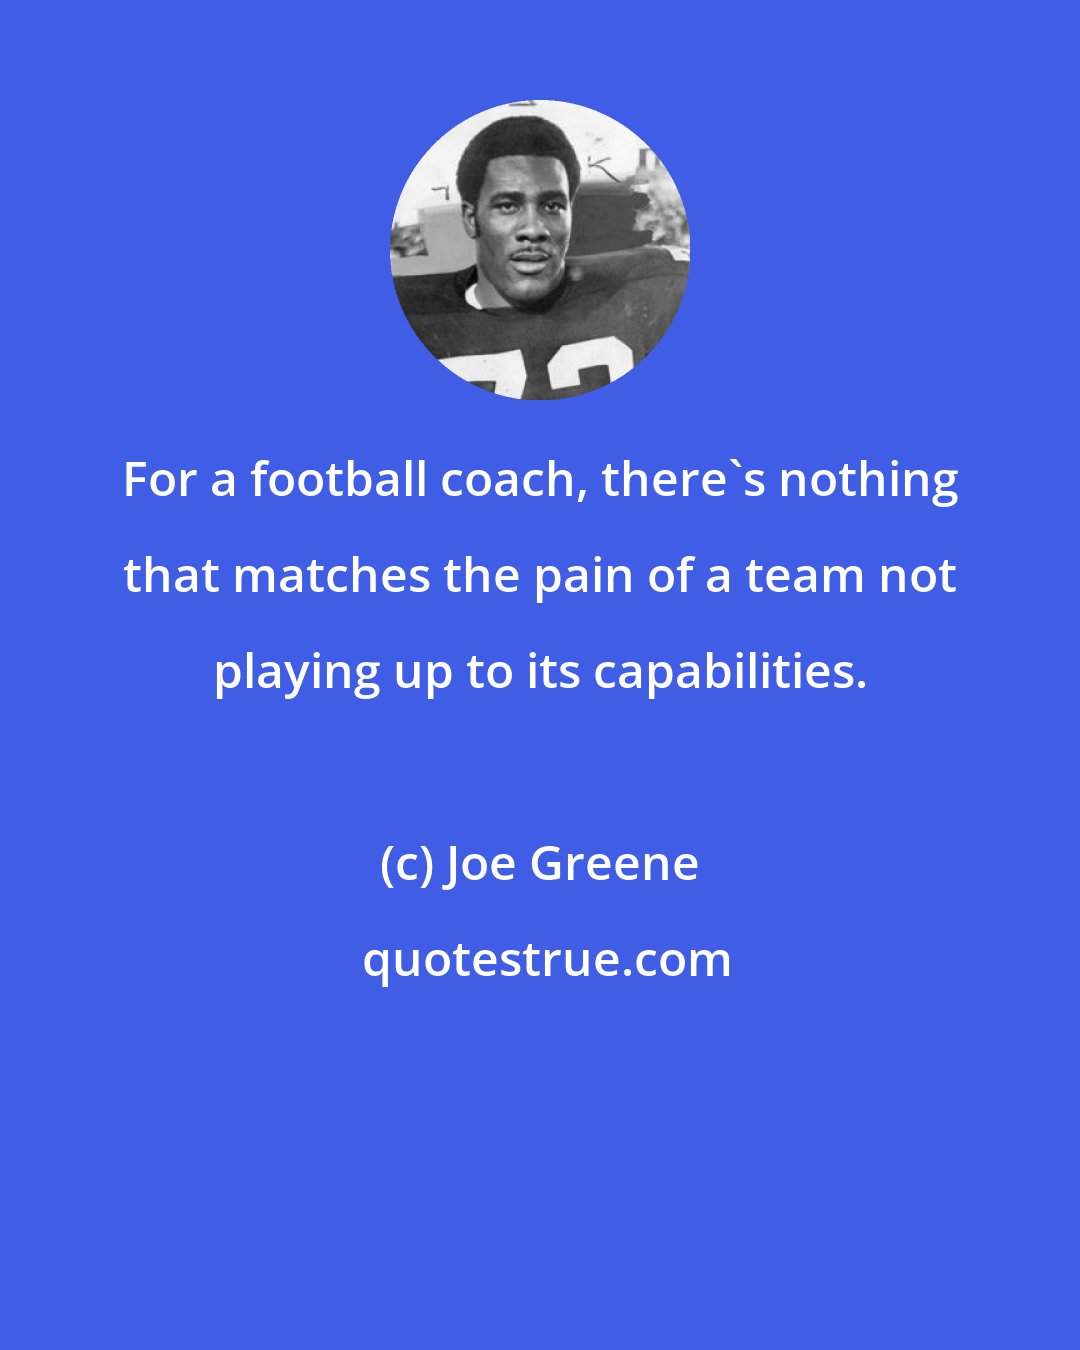 Joe Greene: For a football coach, there's nothing that matches the pain of a team not playing up to its capabilities.